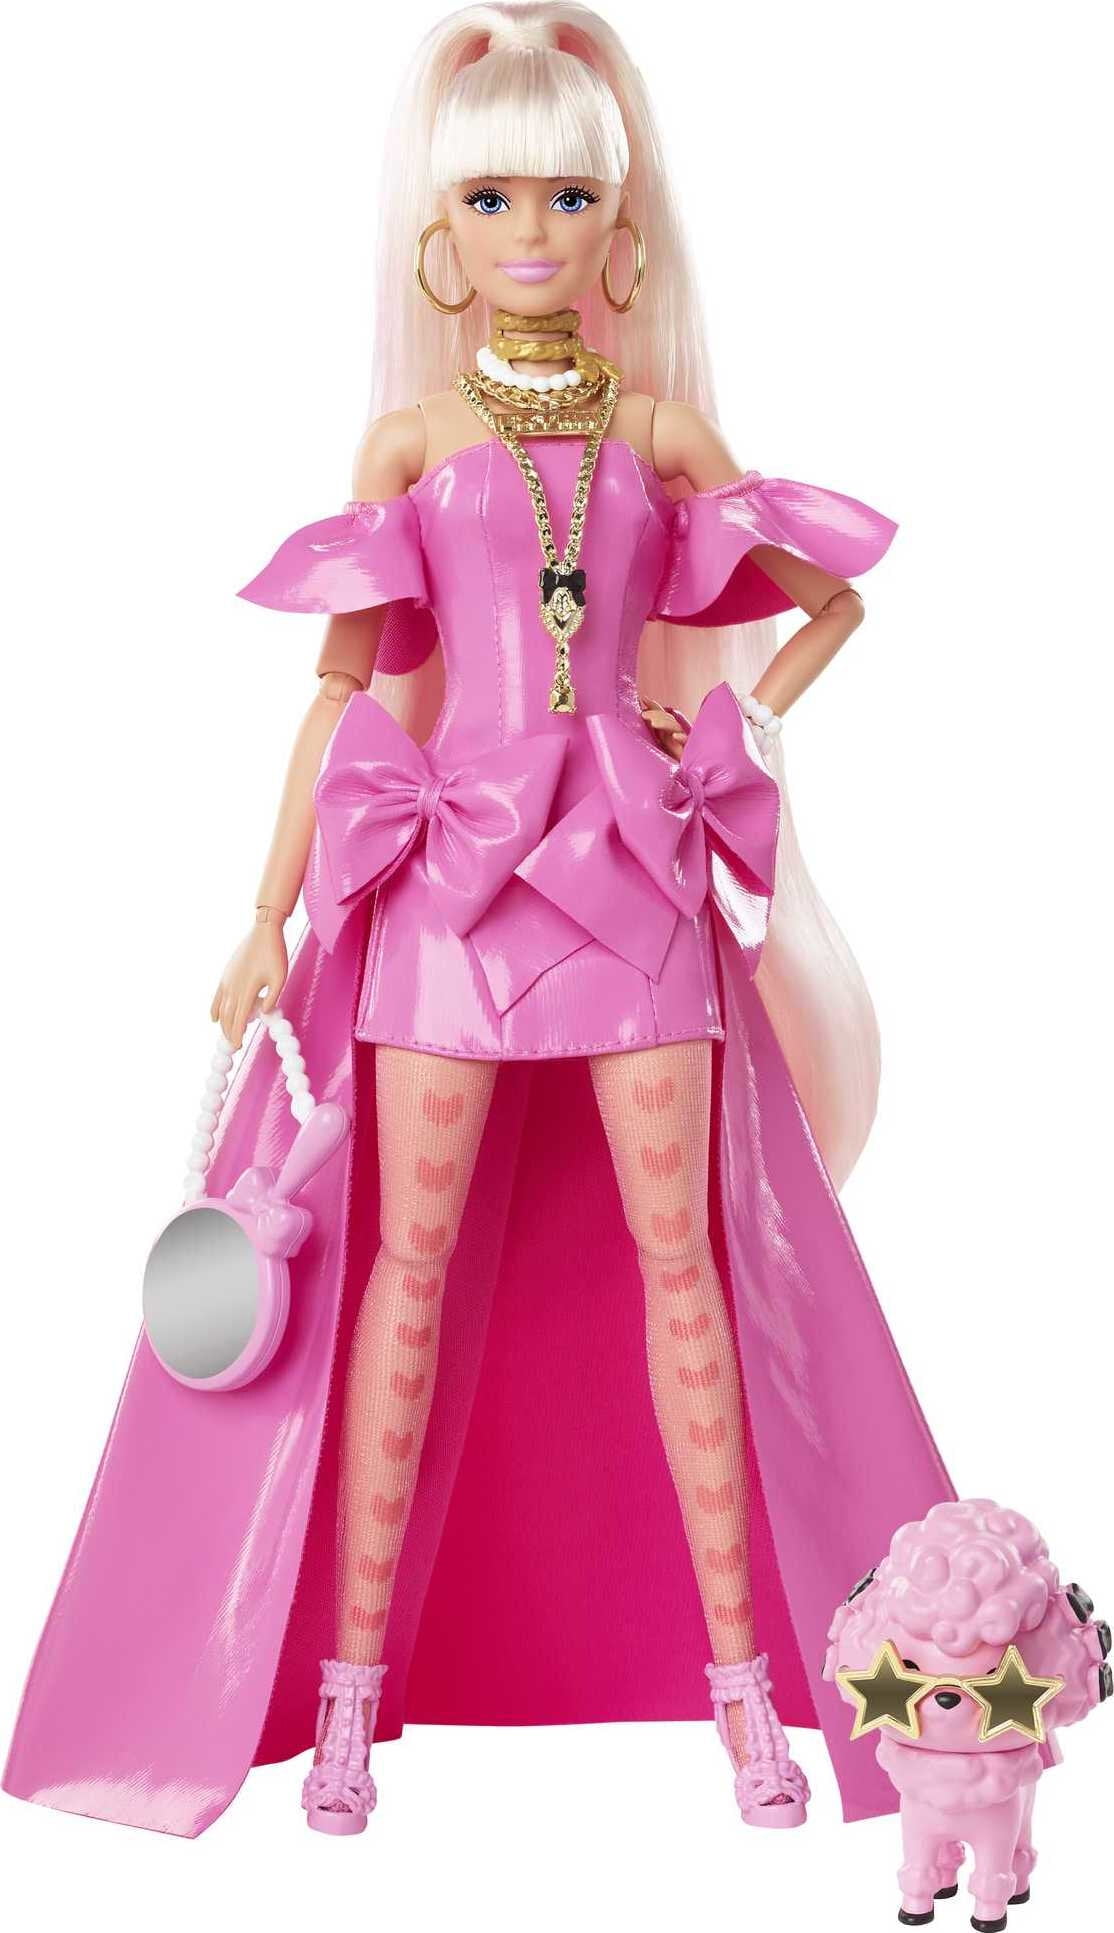  Barbie Extra Fancy Fashion Doll & Accessories with Extra-Long  Blond Hair & Blue Eyes, Pink Glossy Gown & Pet Puppy : Toys & Games